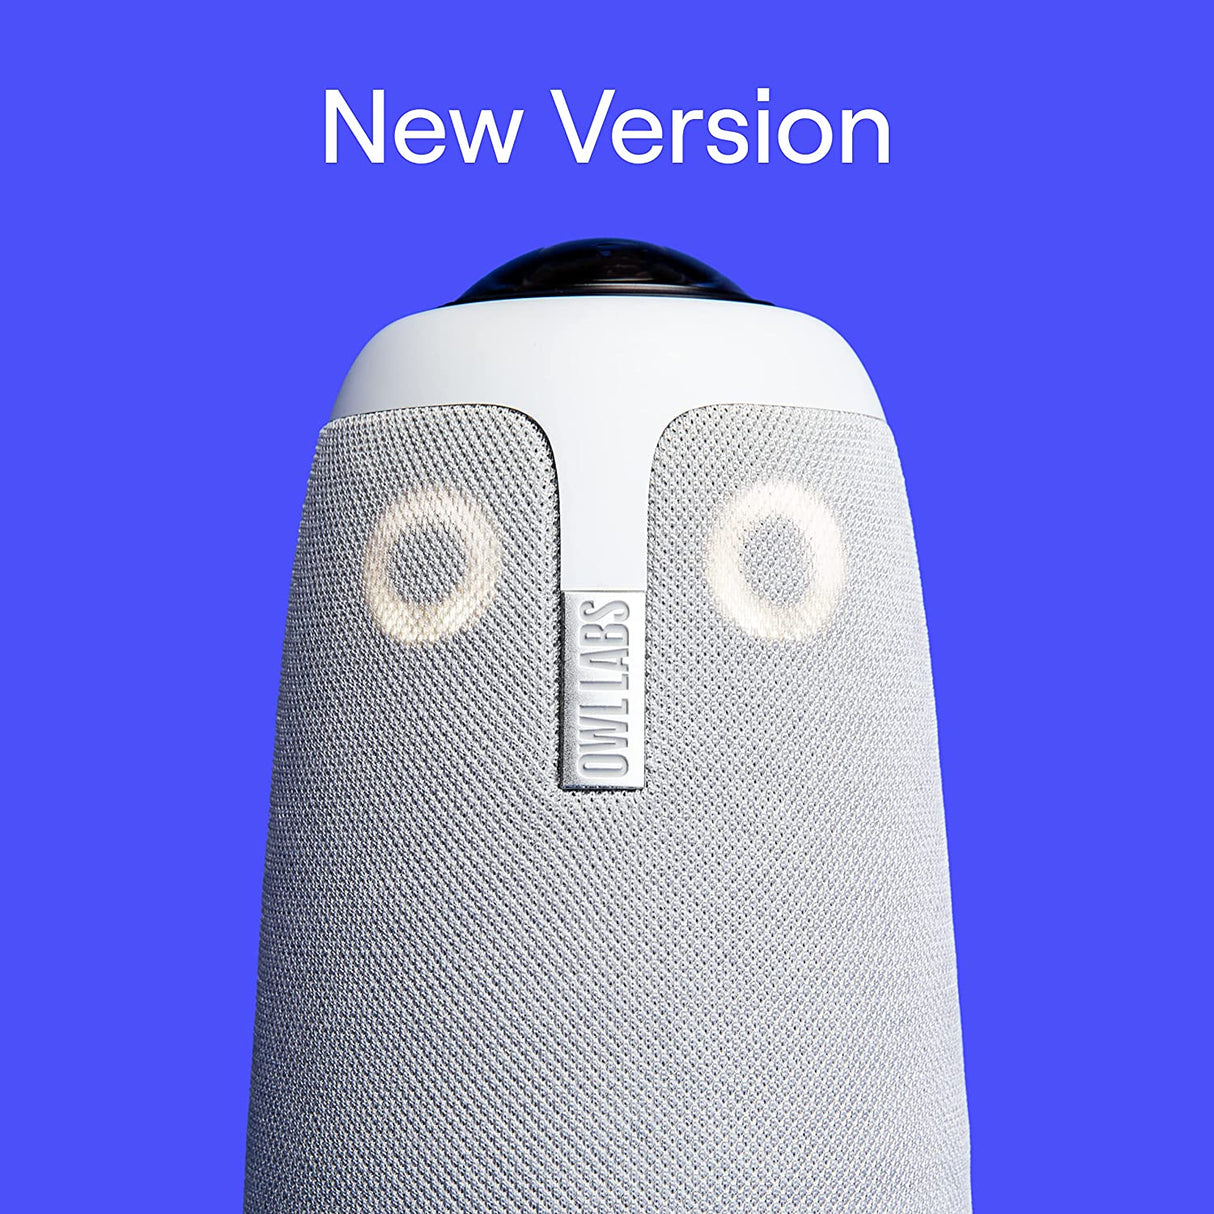 Owl labs Meeting Owl 3 Premium Pack: 360-Degree, 1080p HD Smart Video Conference Camera, Microphone, and Speaker (Automatic Speaker Focus &amp; Smart Zooming and Noise Equalizing) Meeting Owl 3 - Premium Pack